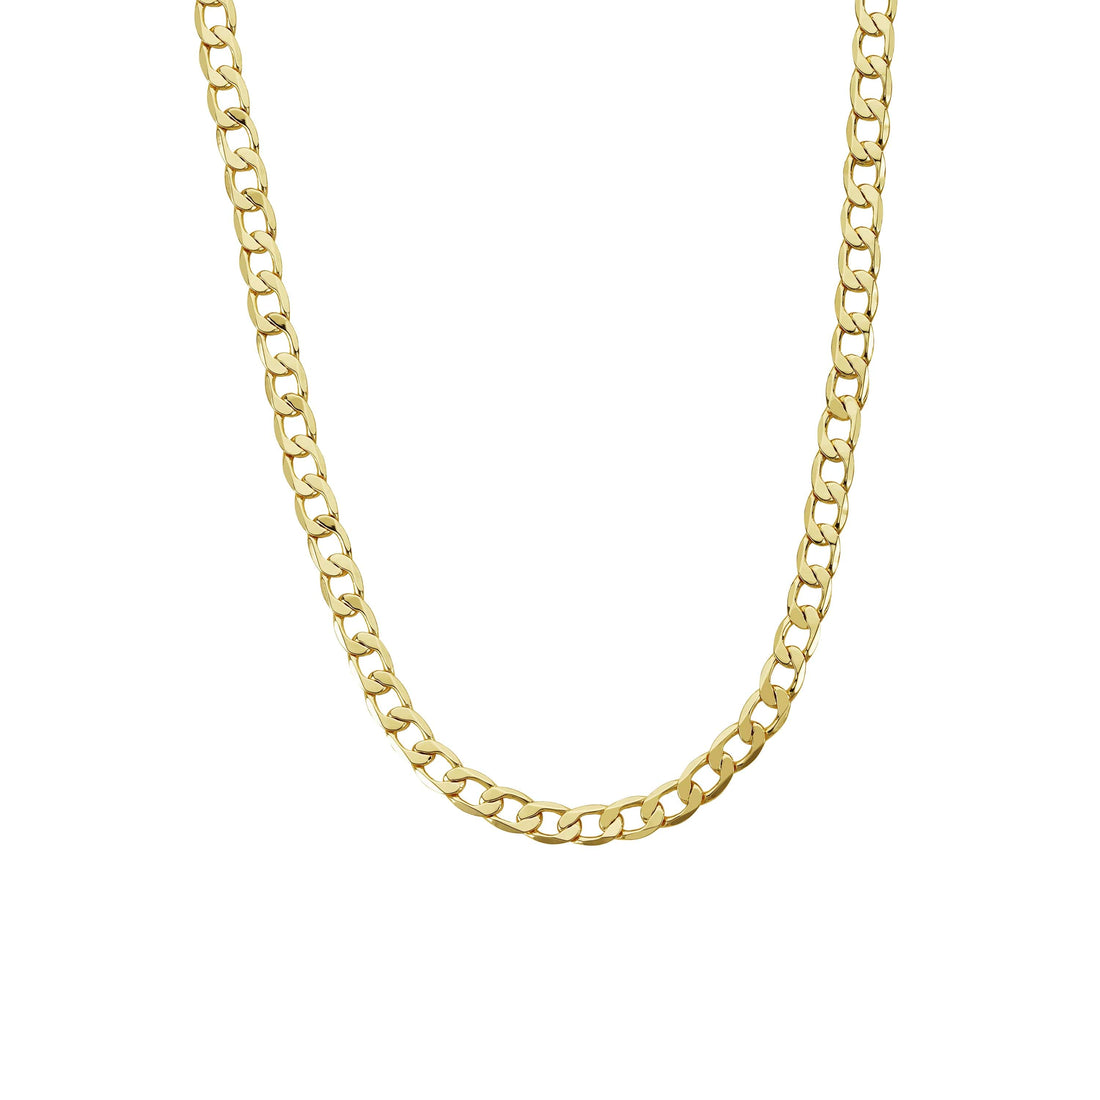 Gold Dipped Chains Curb Chain 6mm - Gold